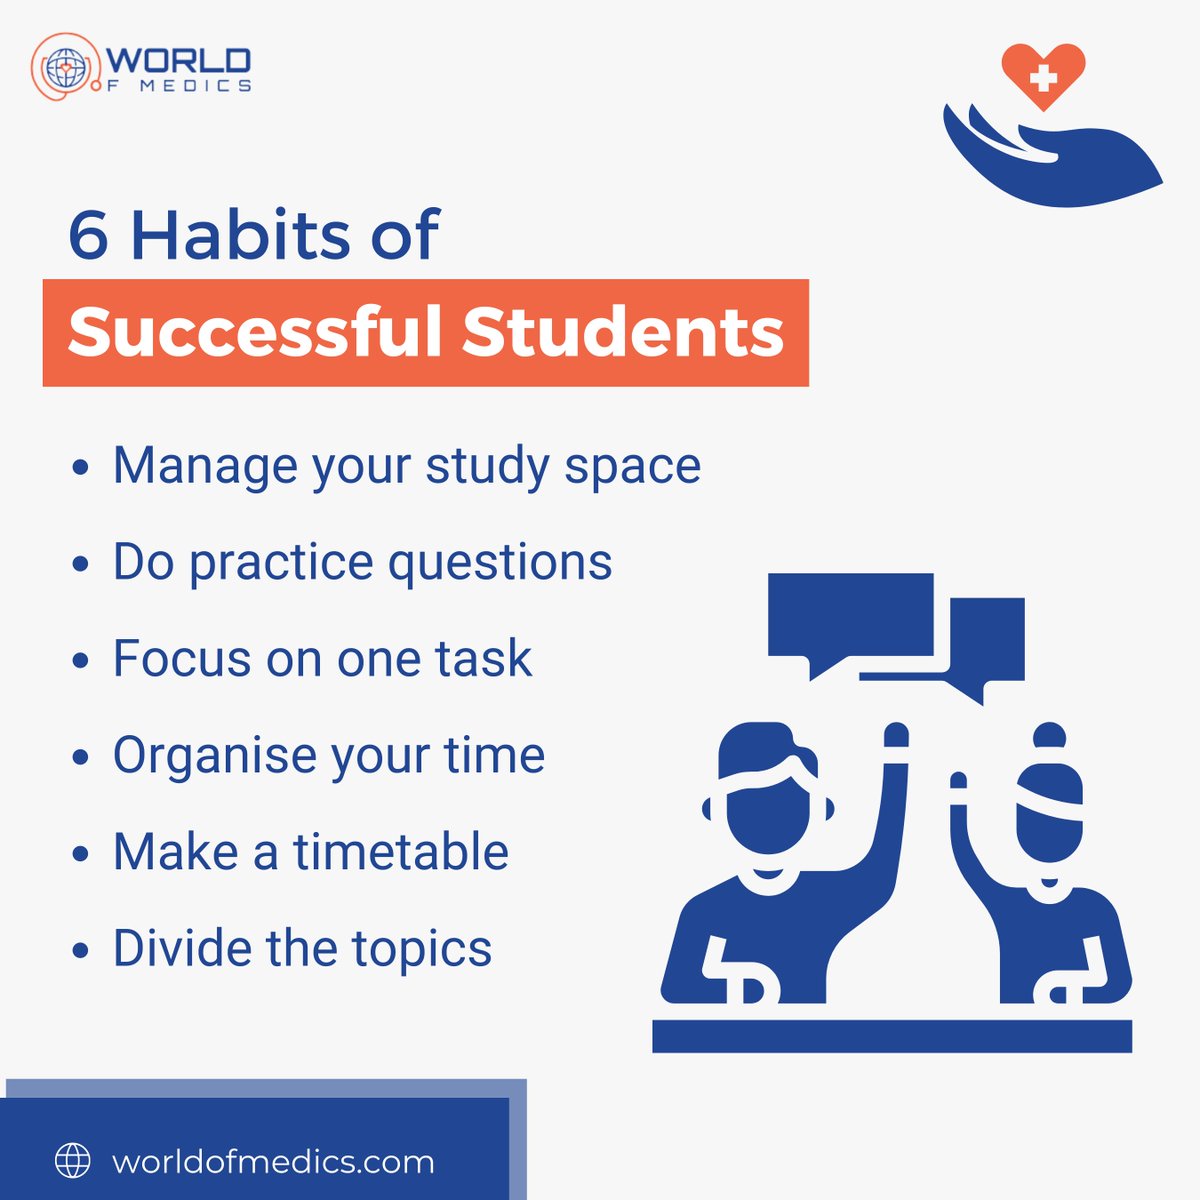 If you're experiencing challenges with studying and exams, it may be time to take a look at your study habits. 
Here are six top tips to help you maximise your studying efficiency.

#WorldofMedics #MedicalTutorials #HumanBody #Doctor #Medic #Nurse #MedicalStudent #MBChB #MD #MBBS